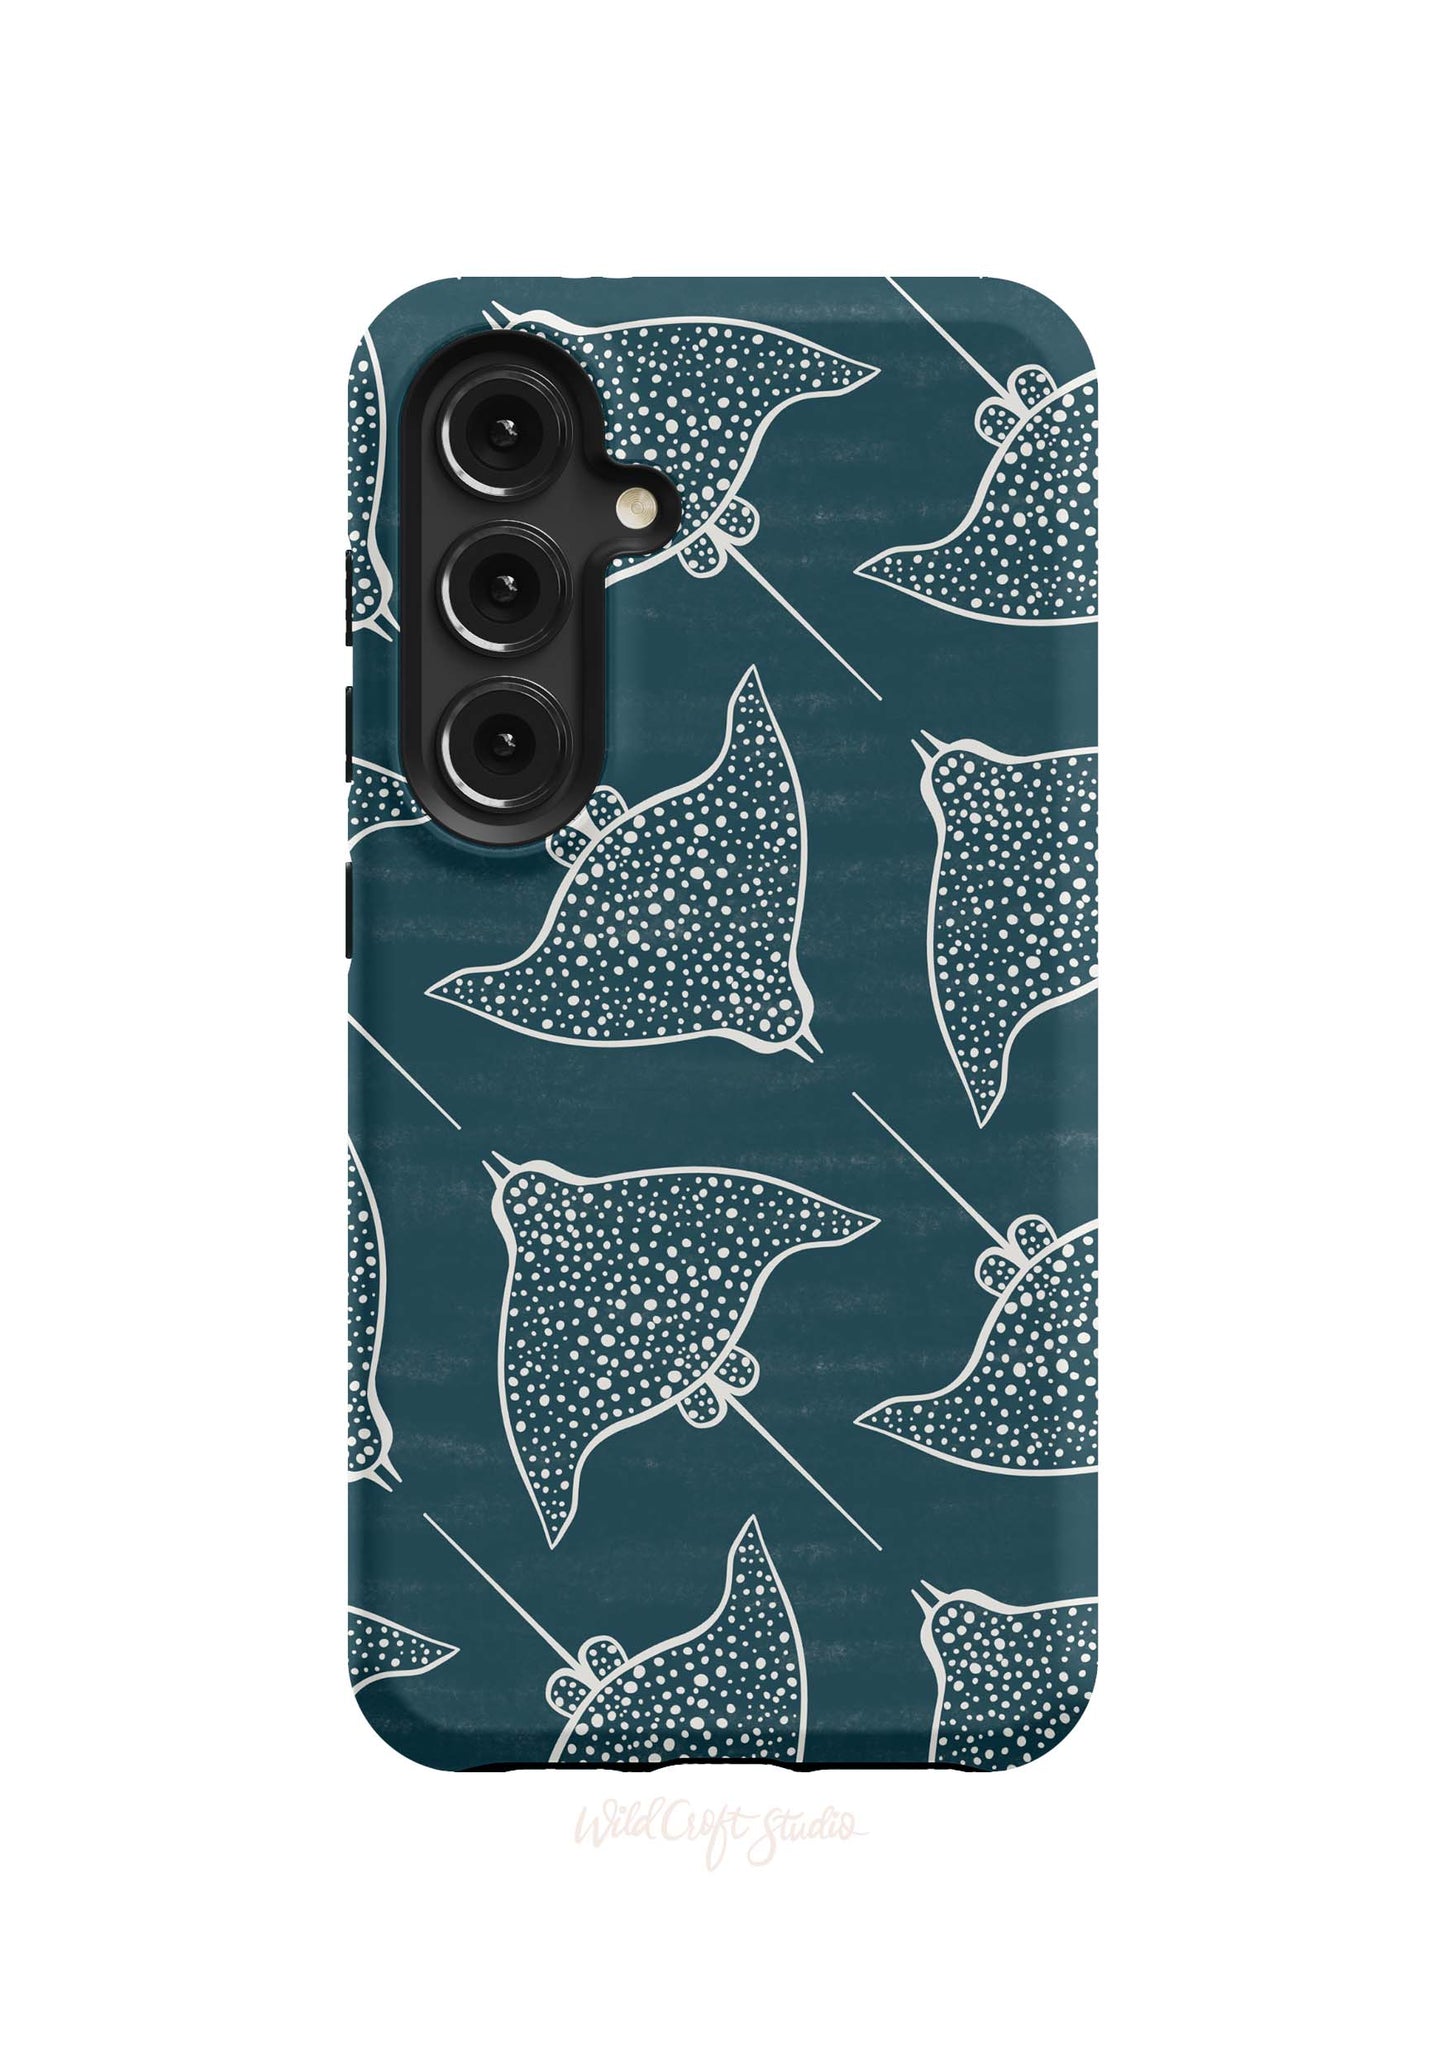 a phone case with a pattern of umbrellas